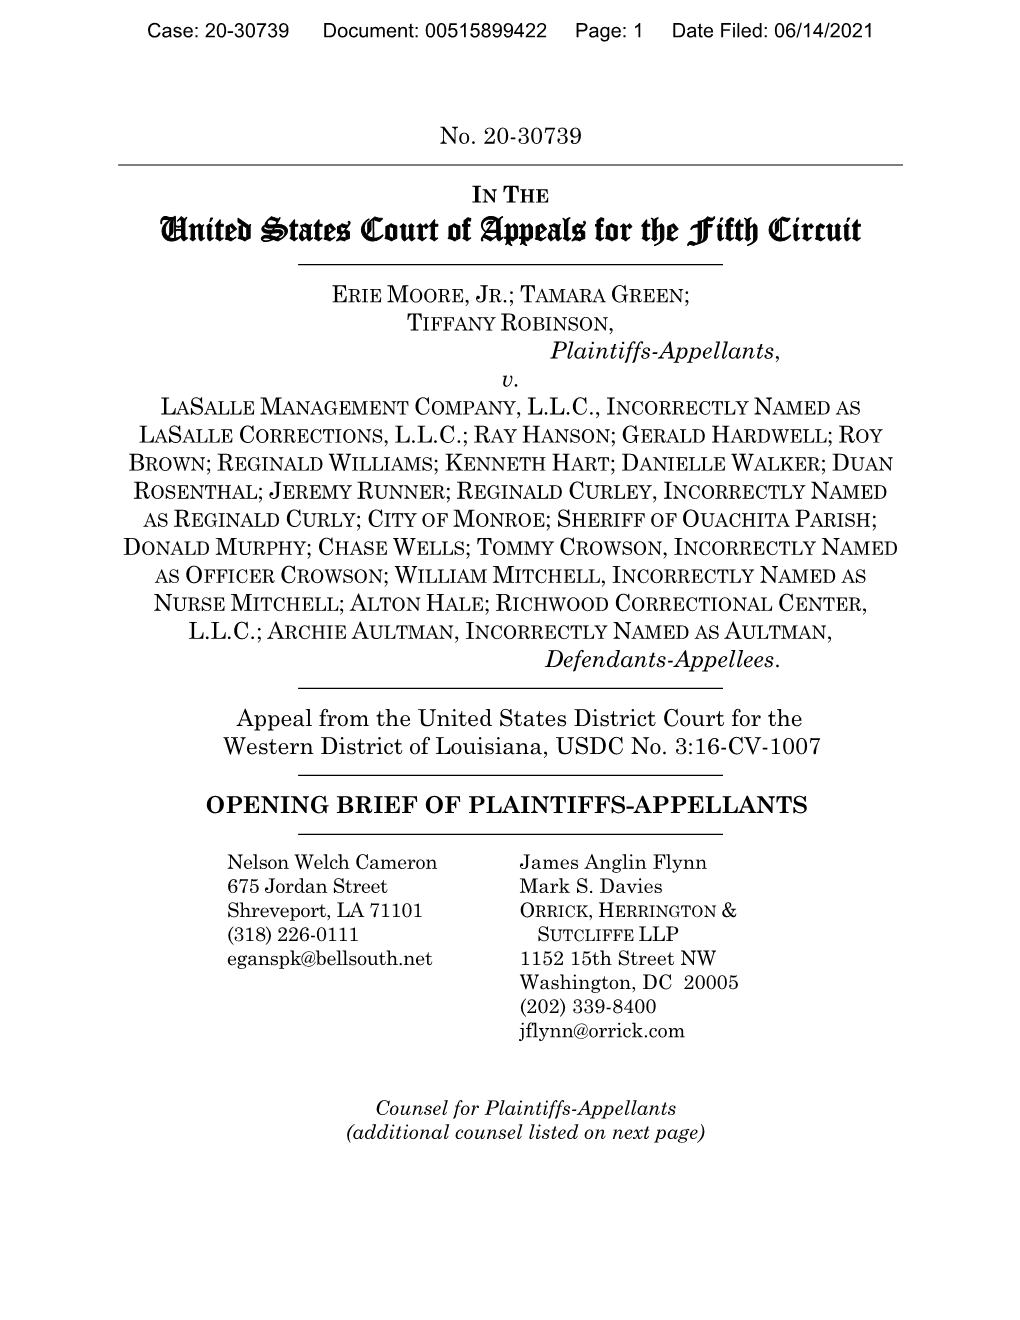 United States Court of Appeals for the Fifth Circuit